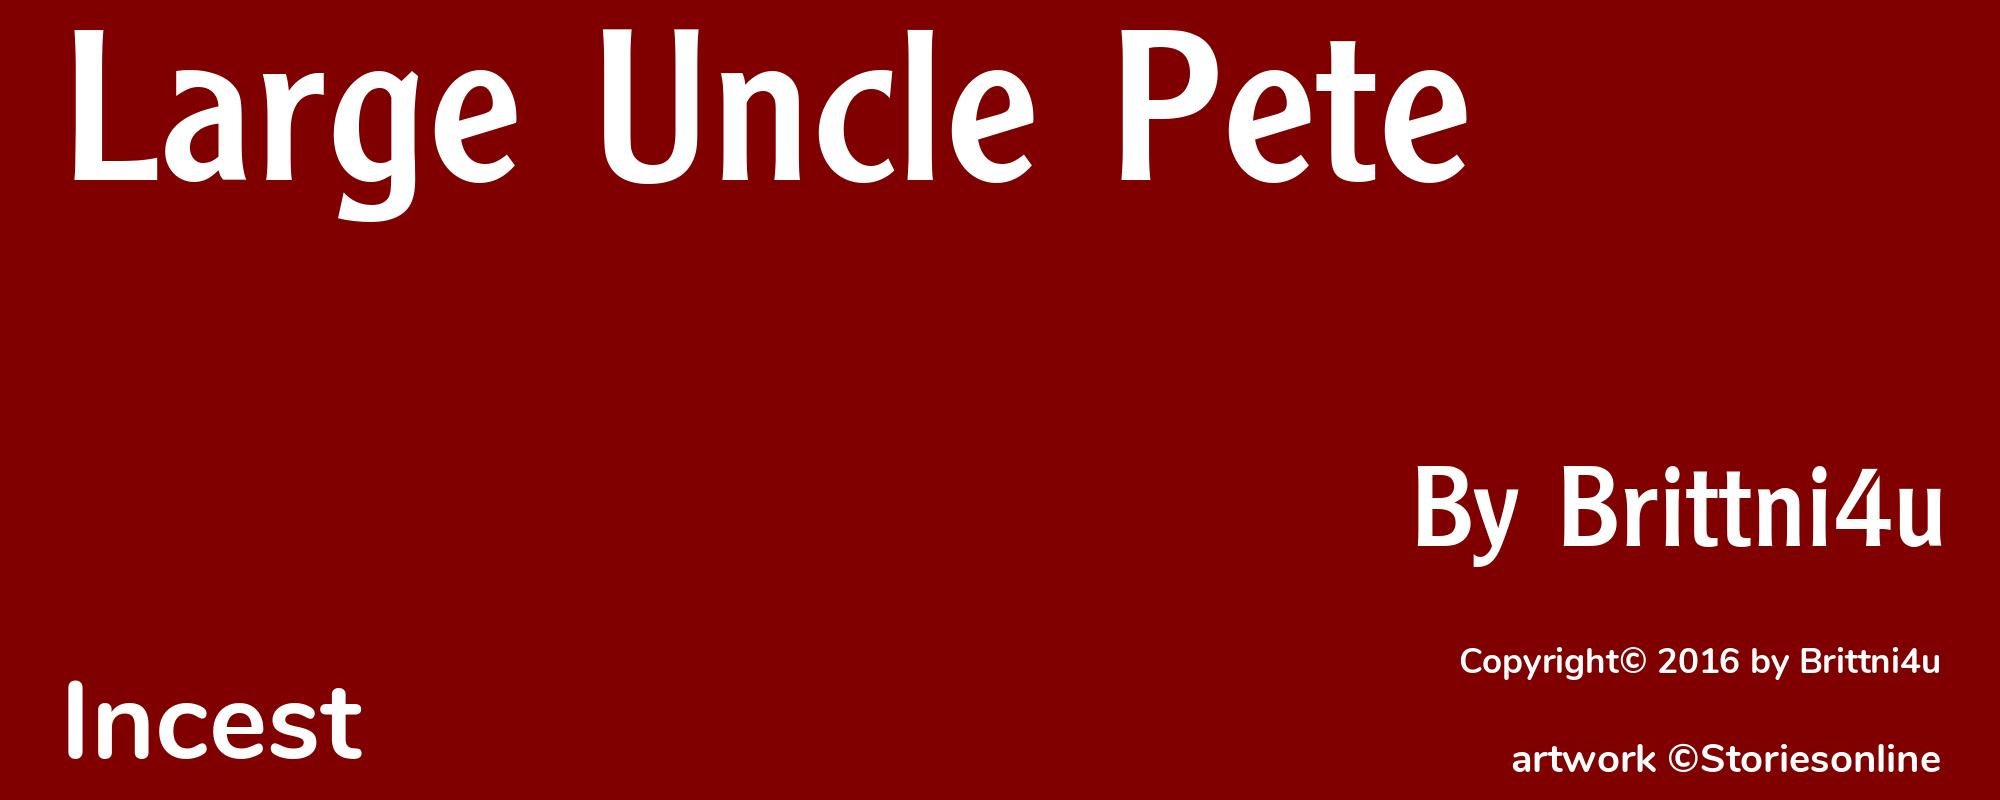 Large Uncle Pete - Cover